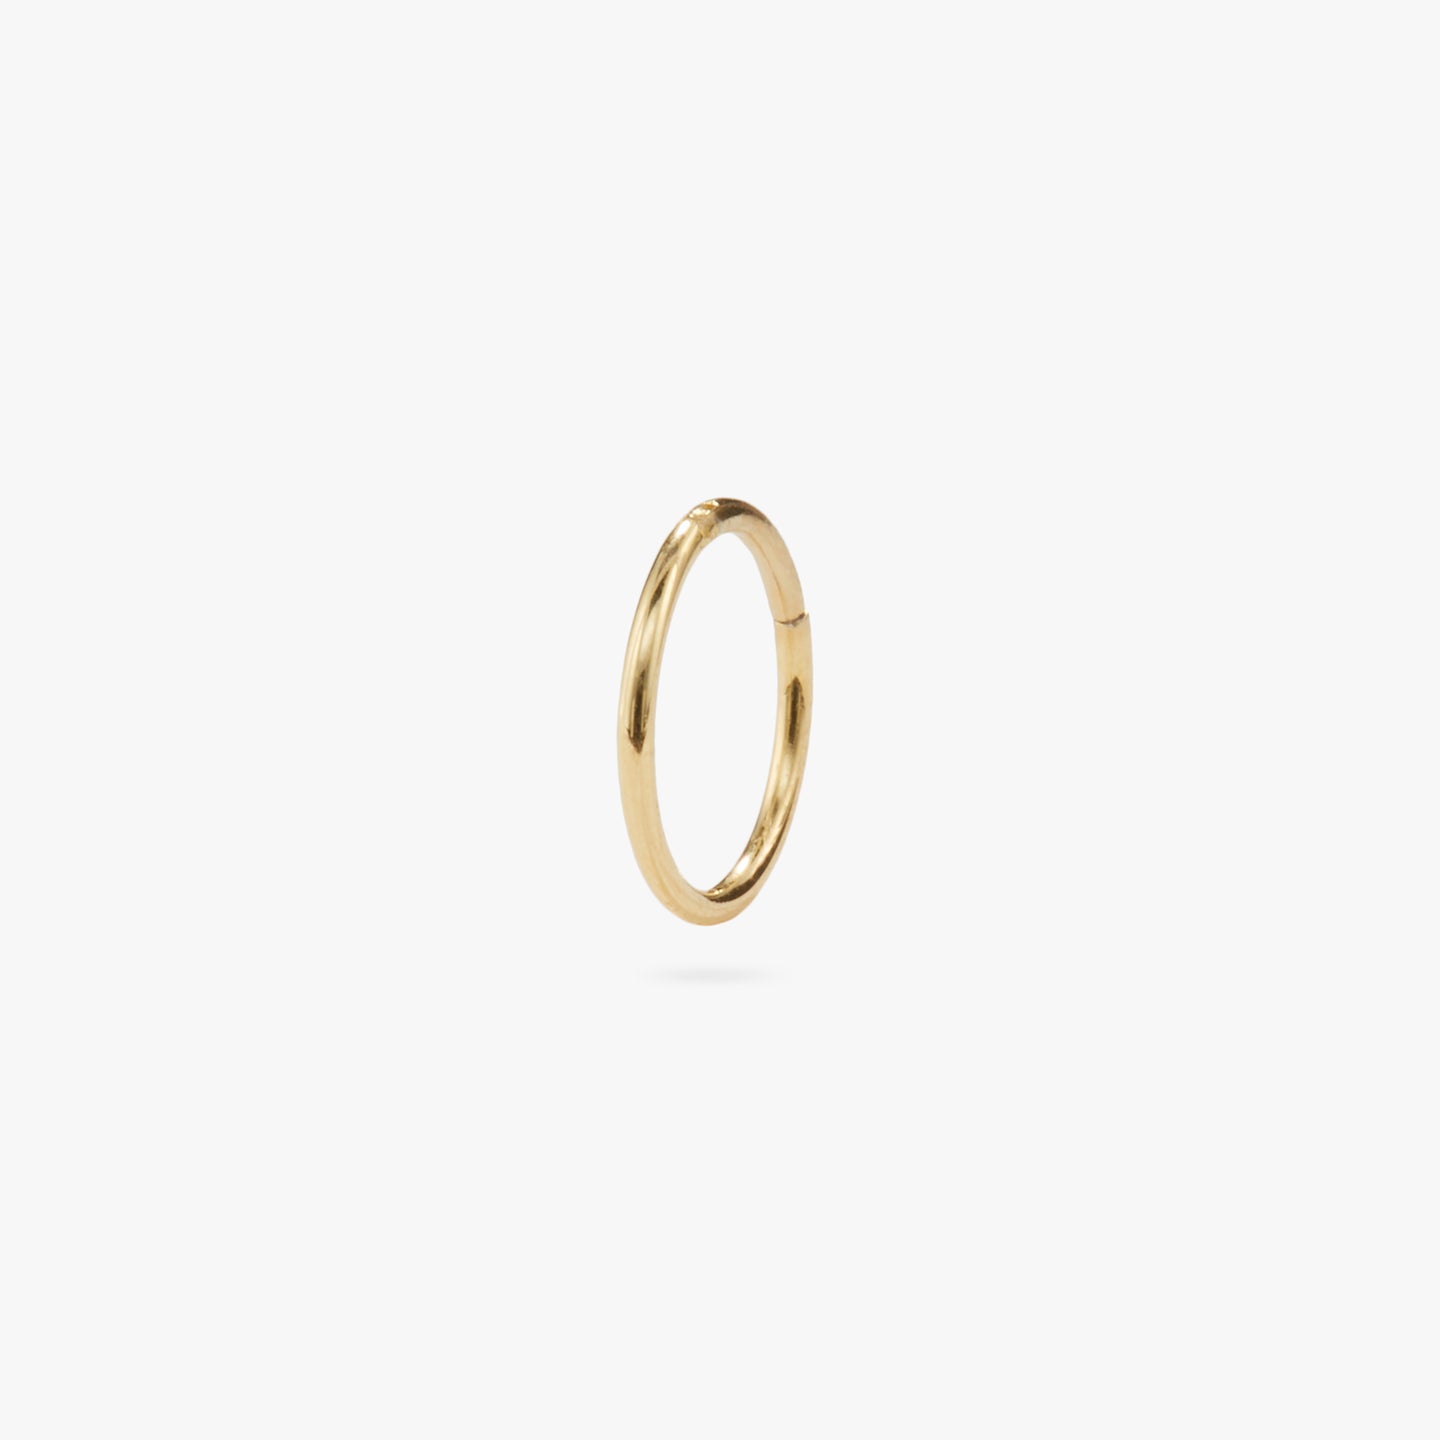 This is a silver clicker earring color:null|gold